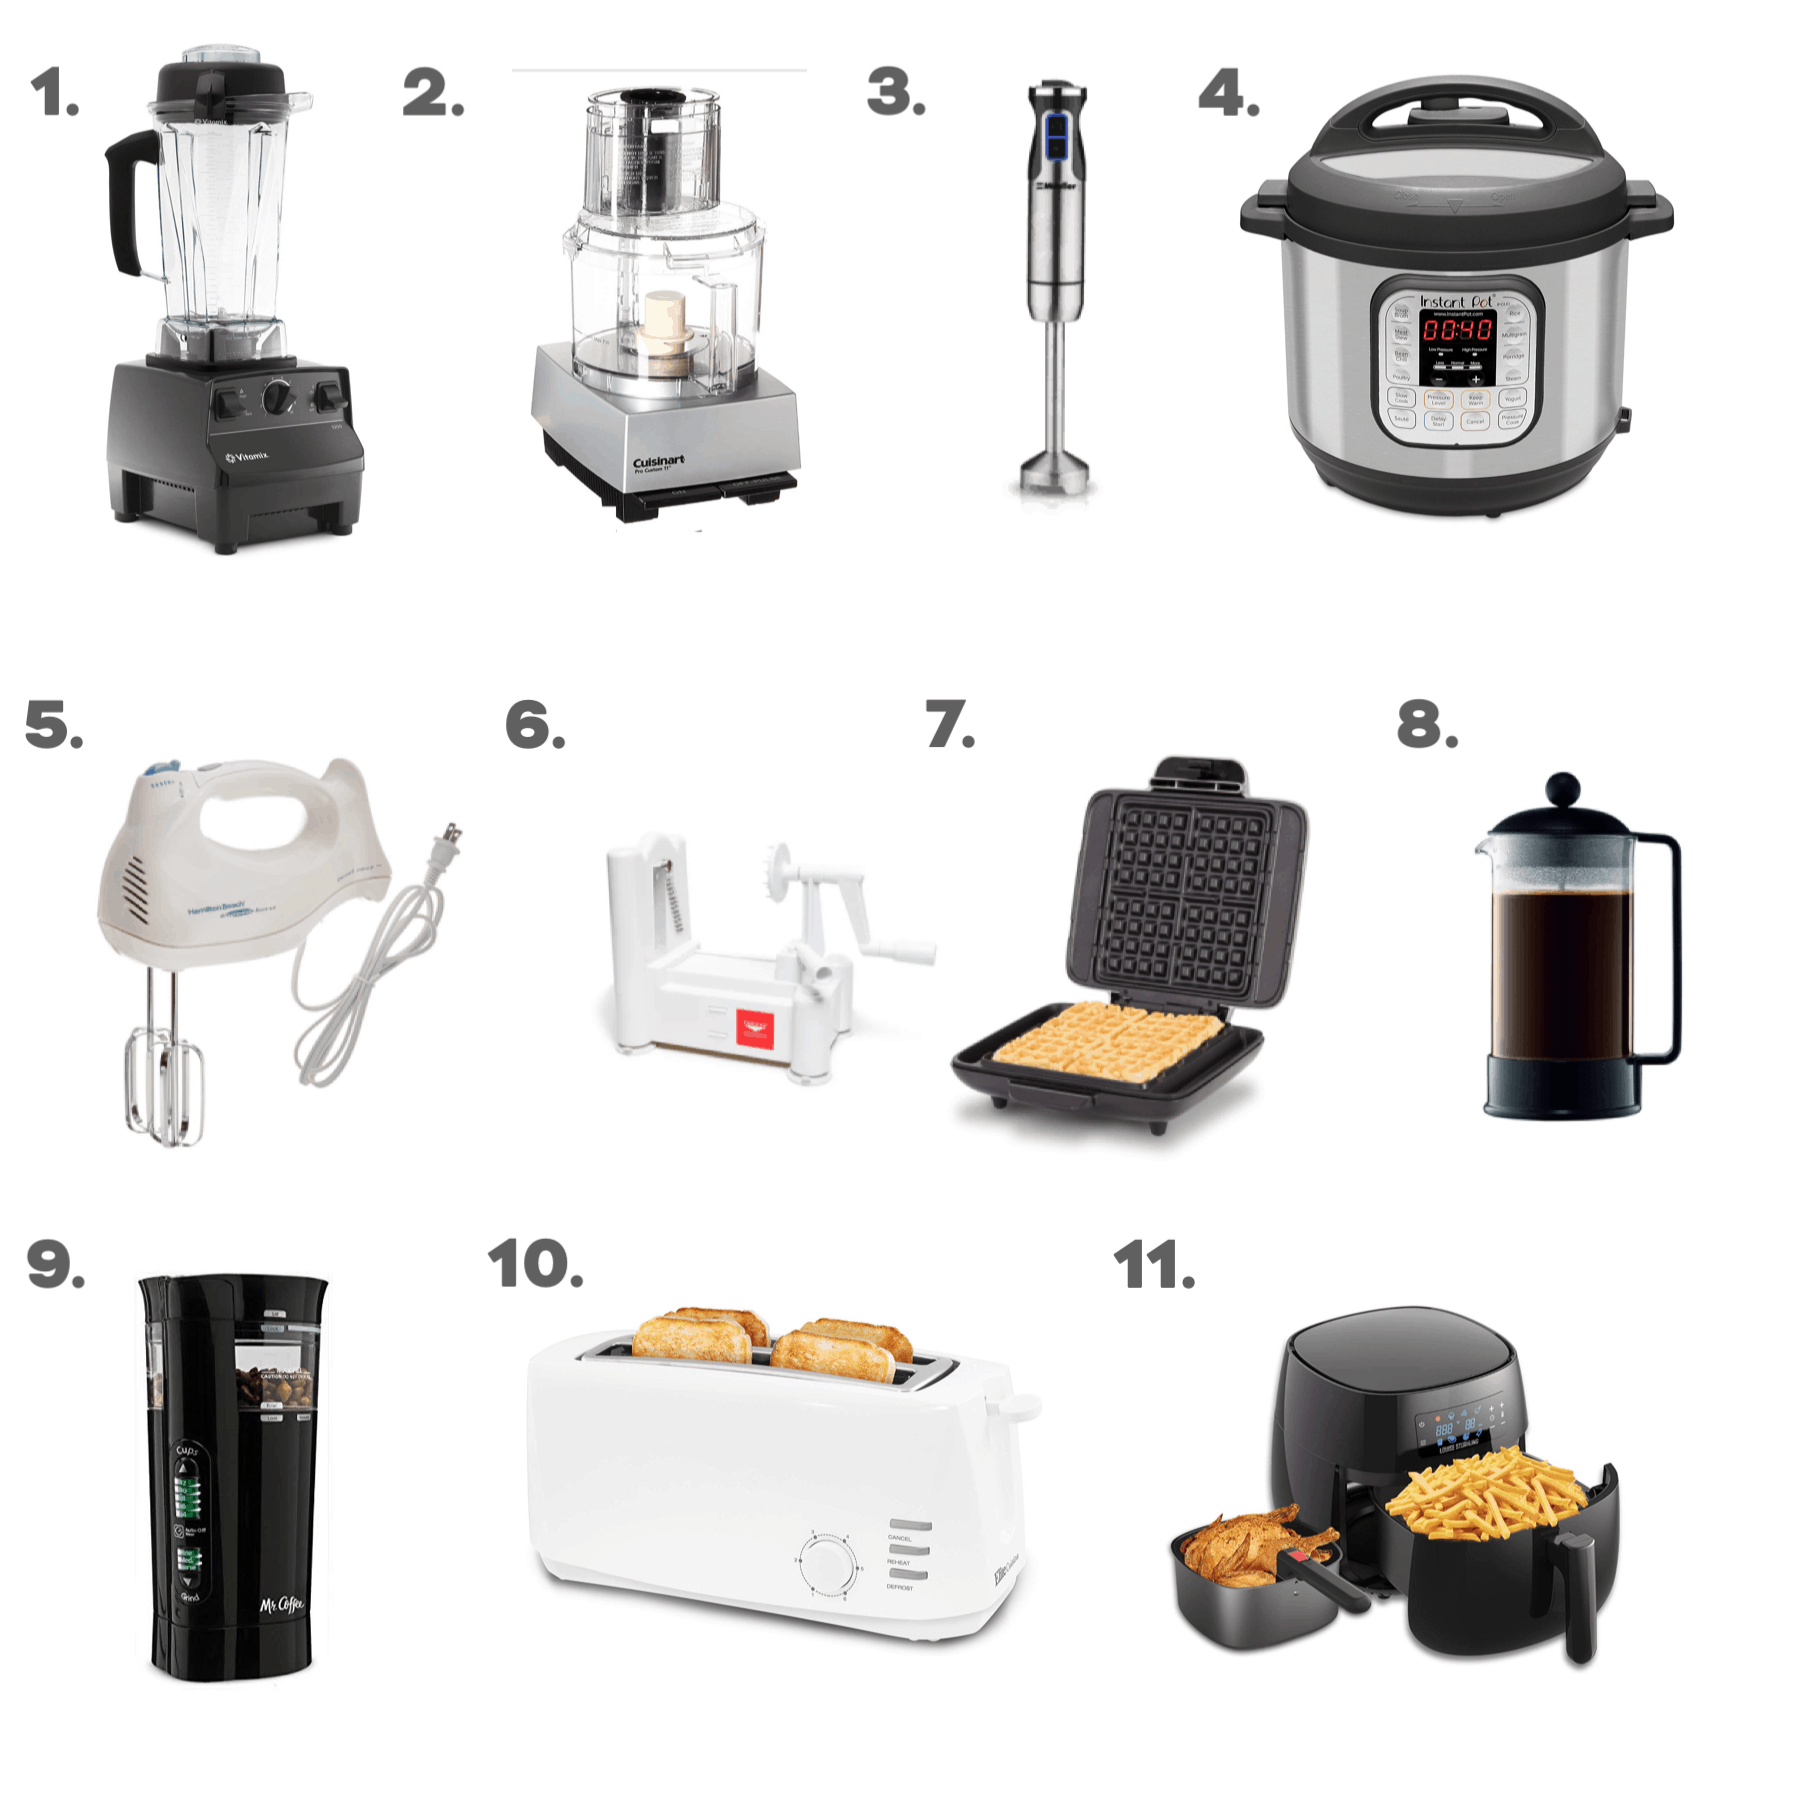 The basics of household appliances you need to know